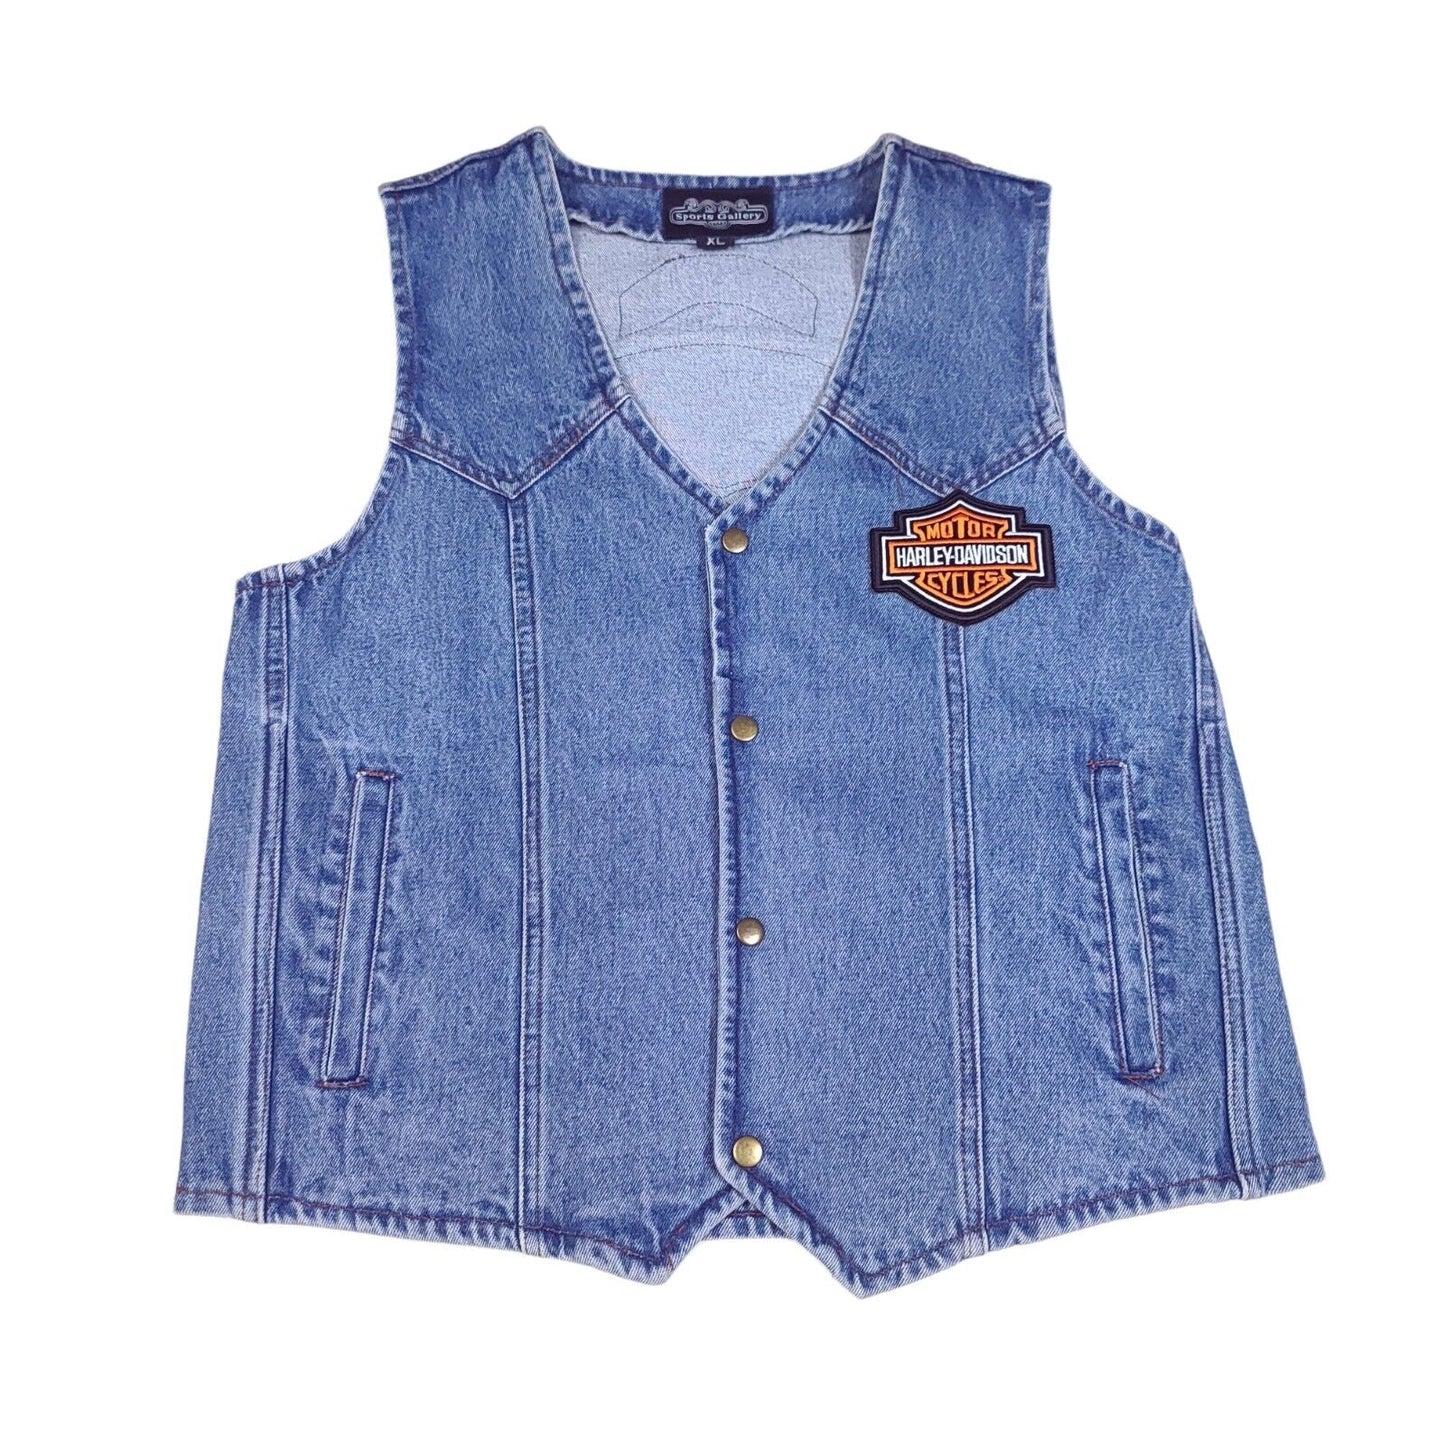 Harley Davidson Owners Group Windy City Chapter Denim Motorcycle Vest